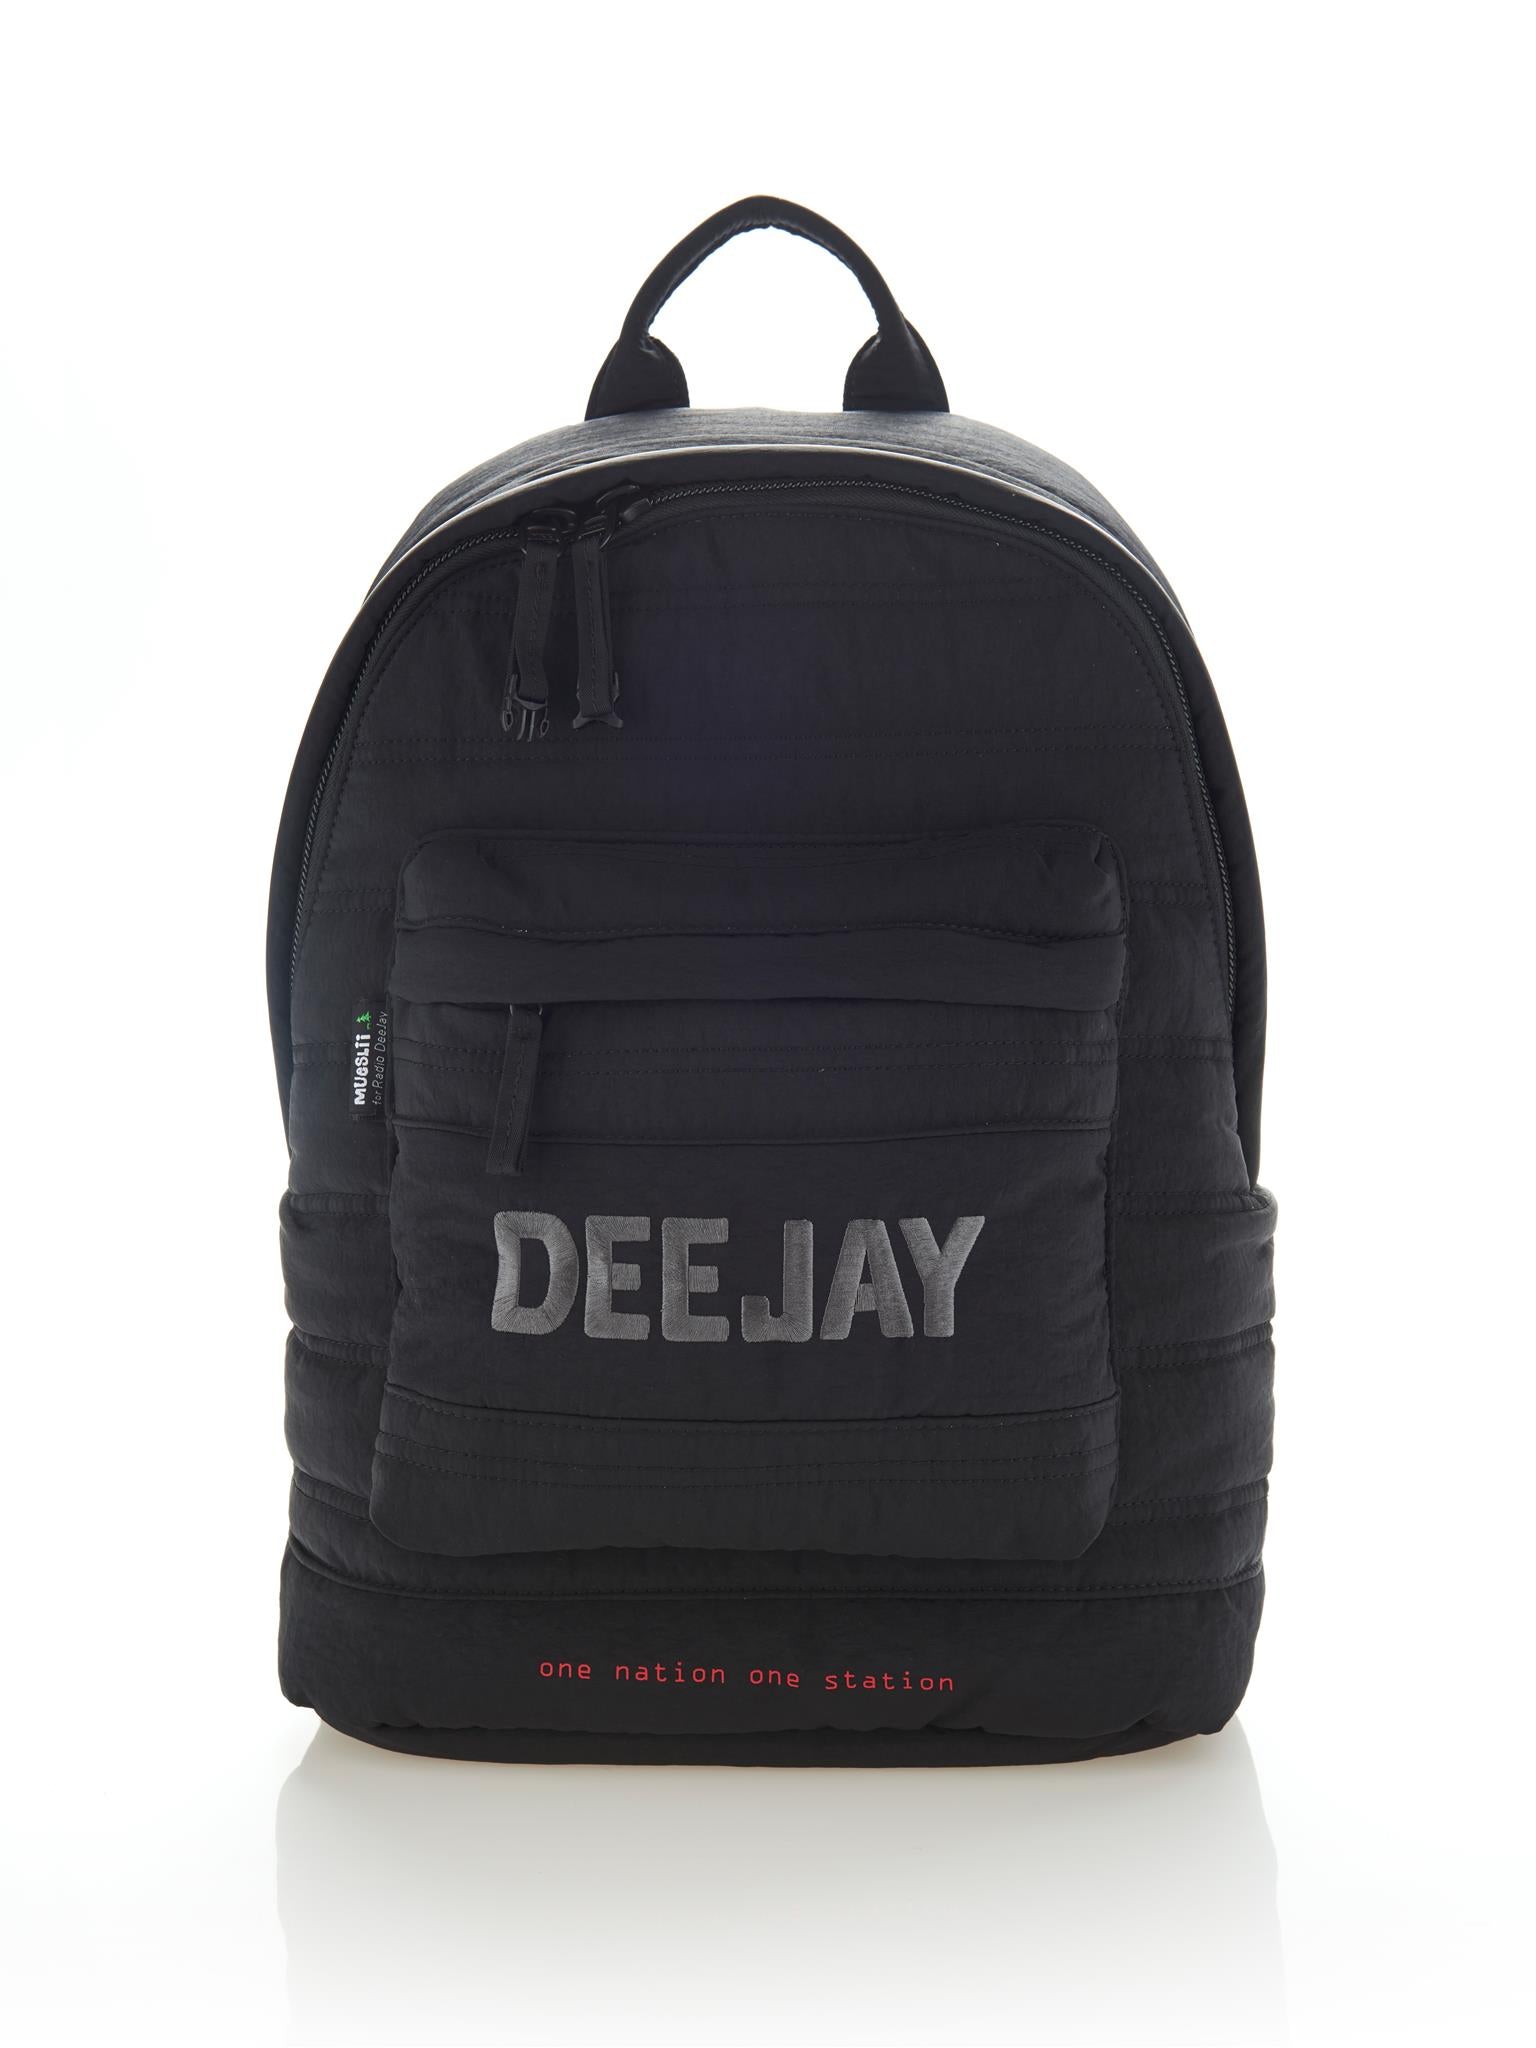 Mueslii original puffer laptop backpack made of high density nylon and Ykk zips, color black Deejay, front view.